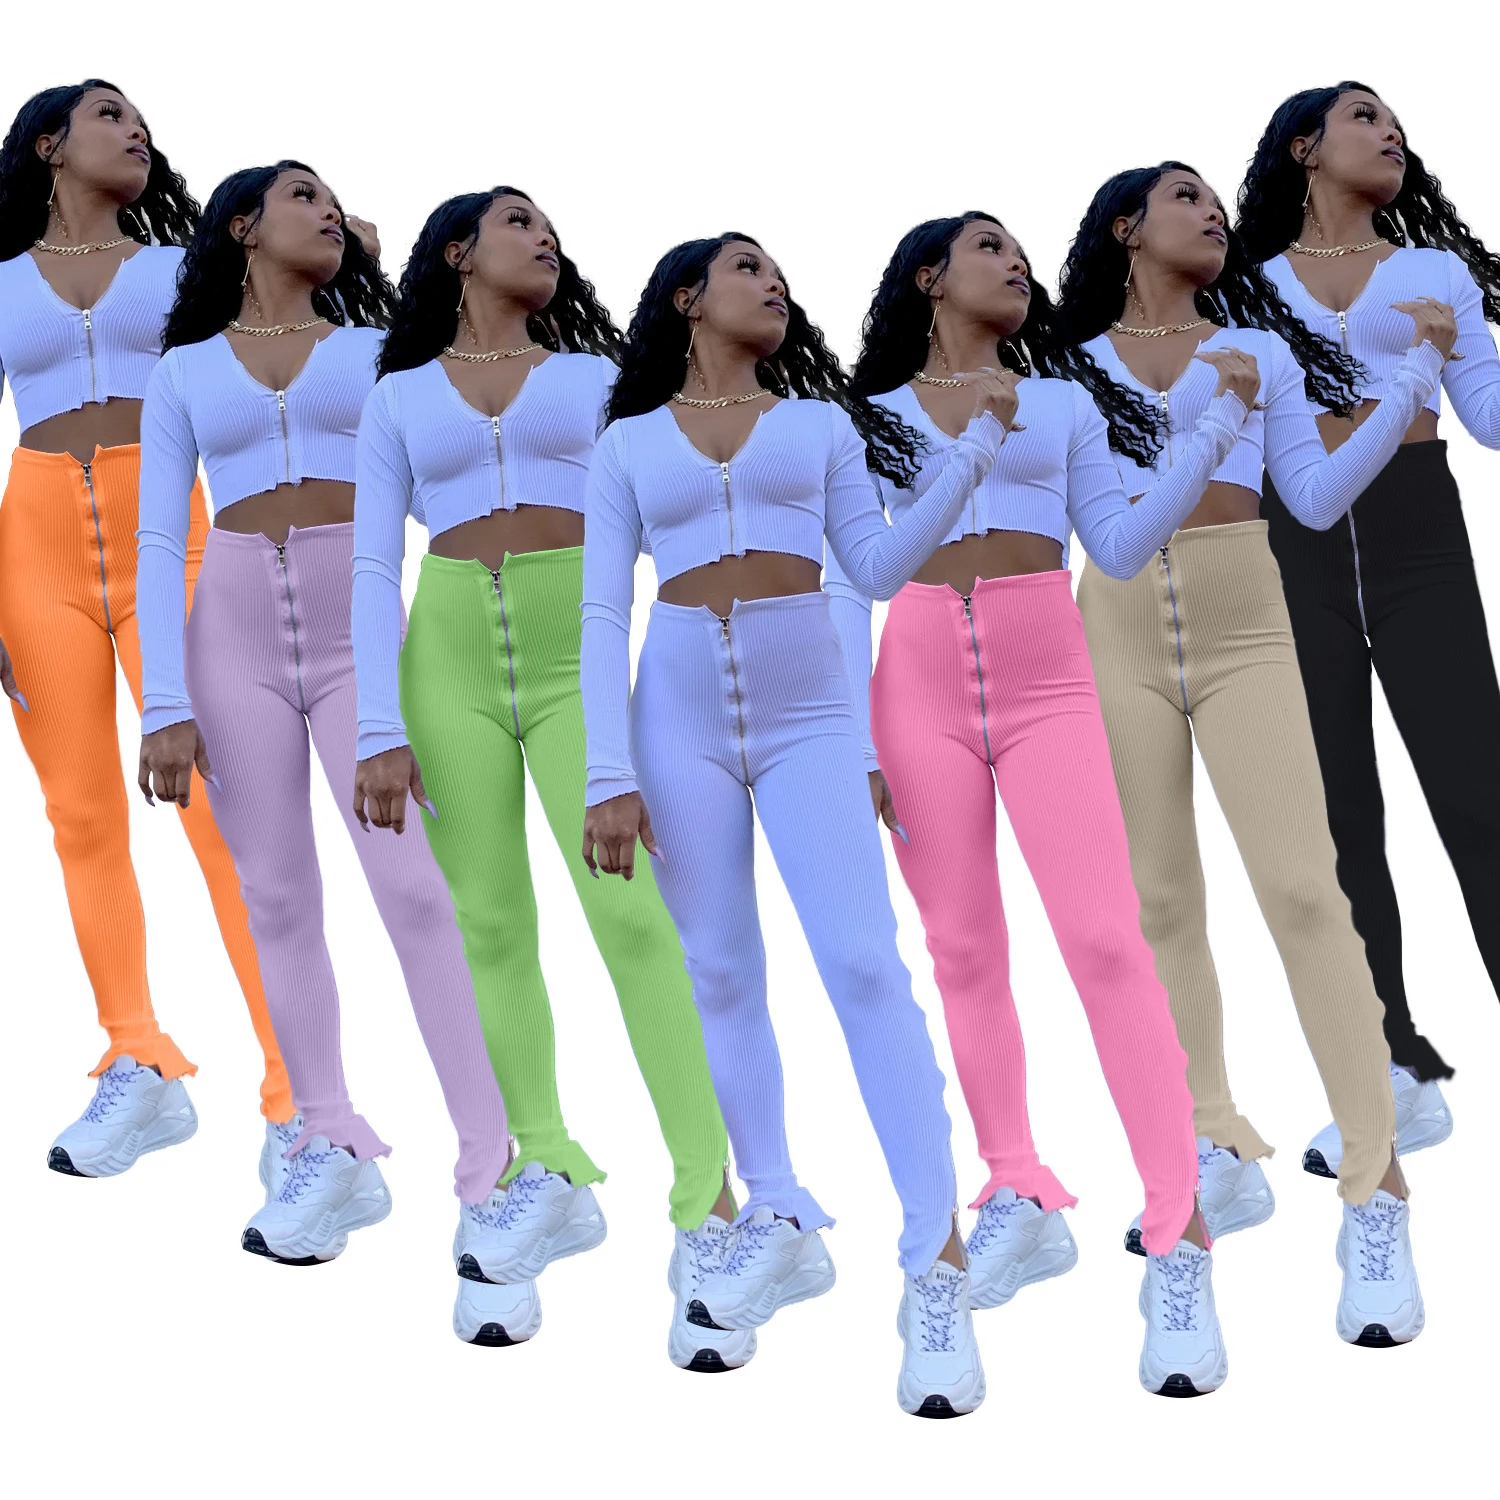 Spring 2021 high waist zipper casual fitness fashion womens trousers pants with split